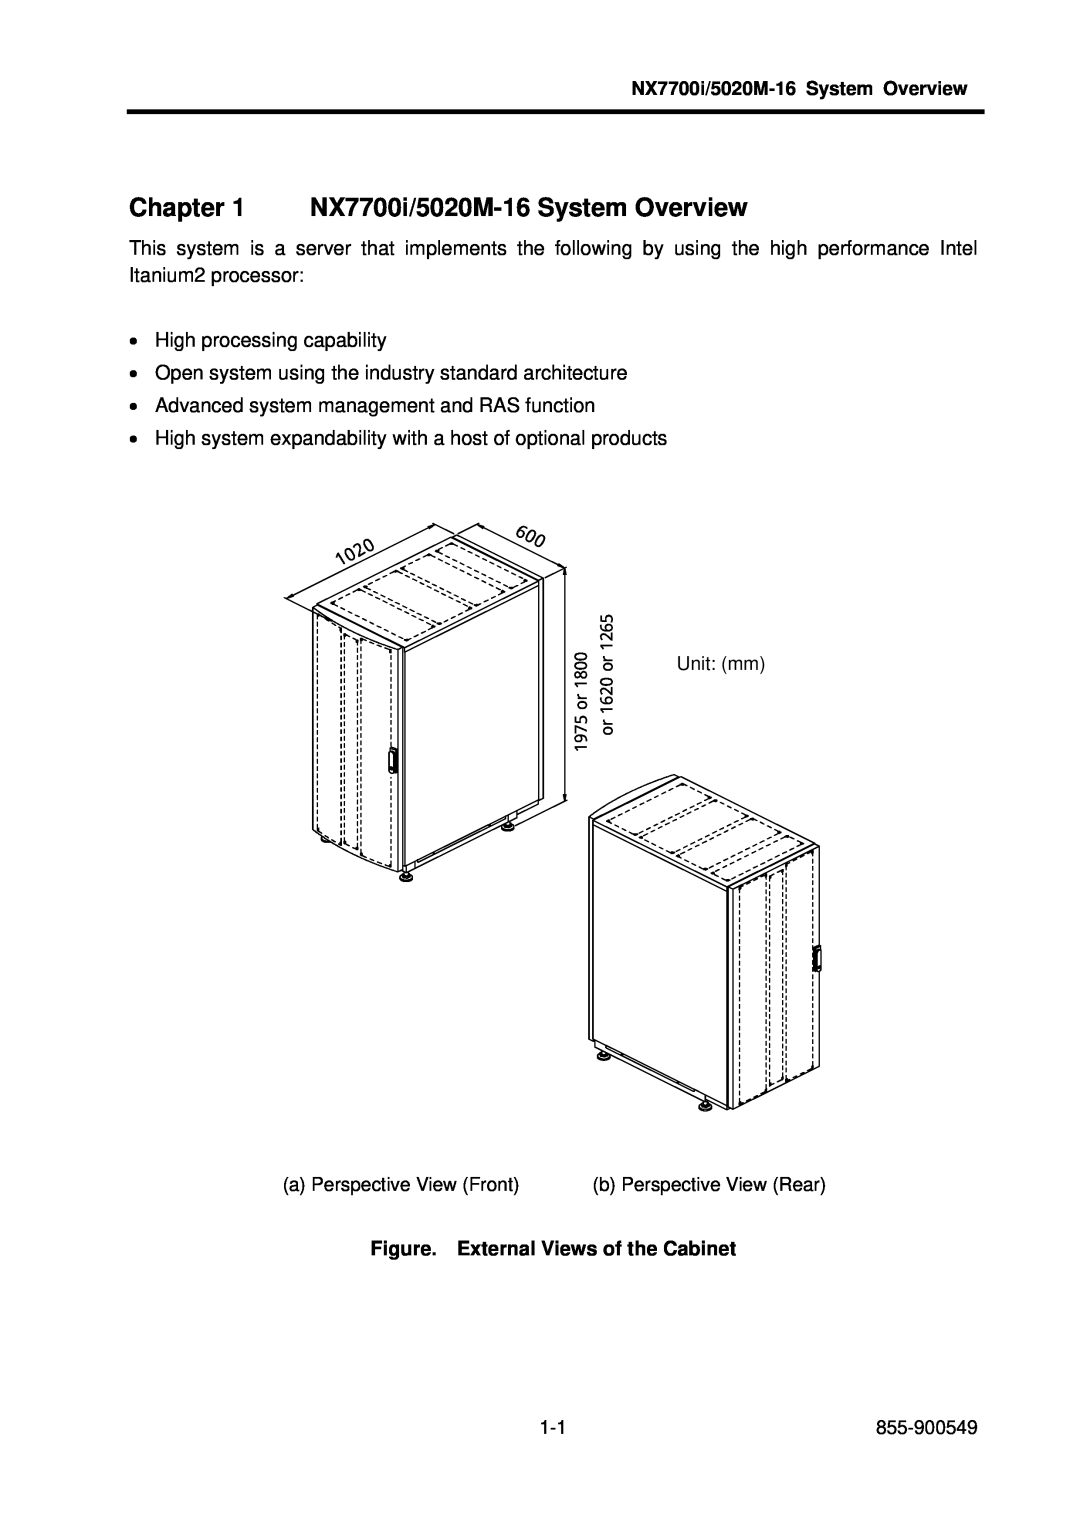 NEC operation manual NX7700i/5020M-16 System Overview, Figure. External Views of the Cabinet 